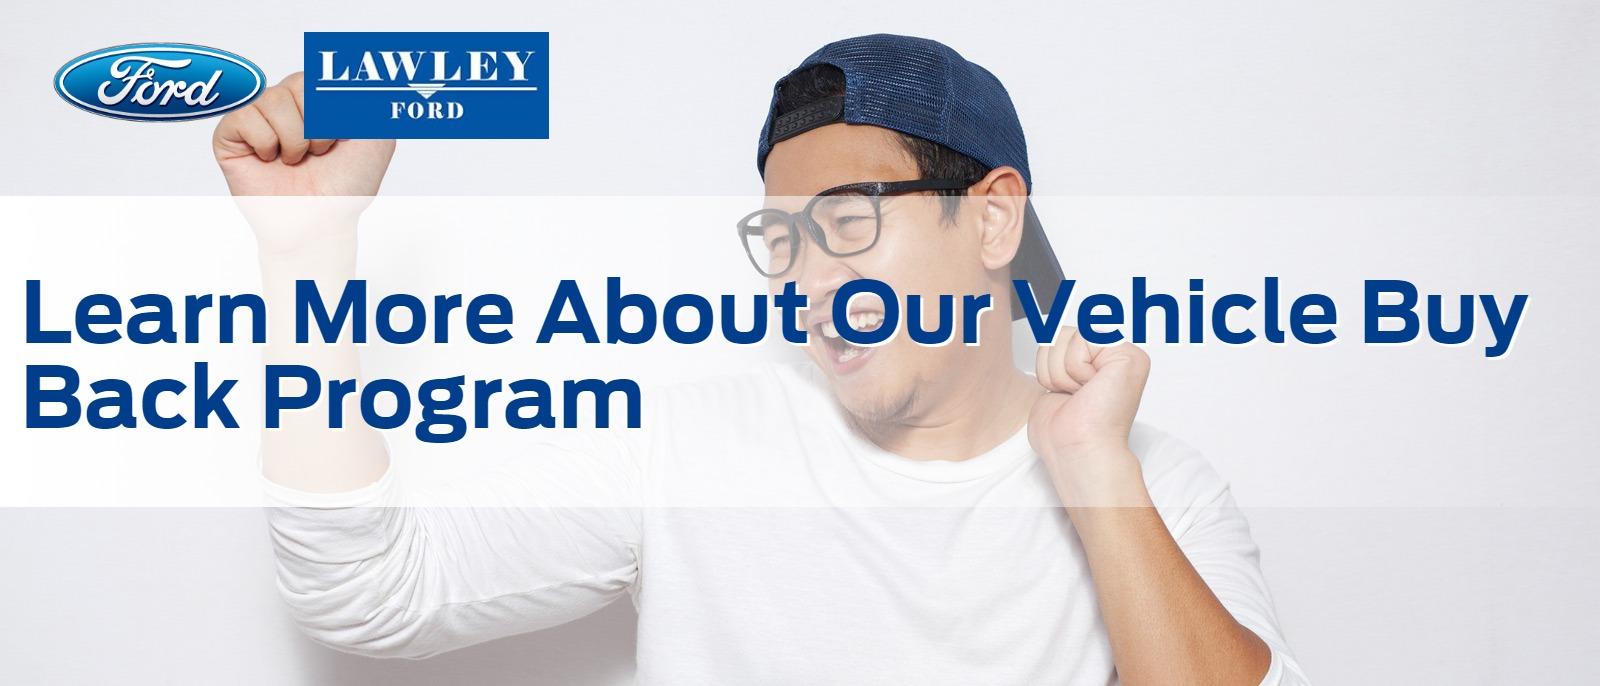 Learn More About Our Vehicle Buy Back Program